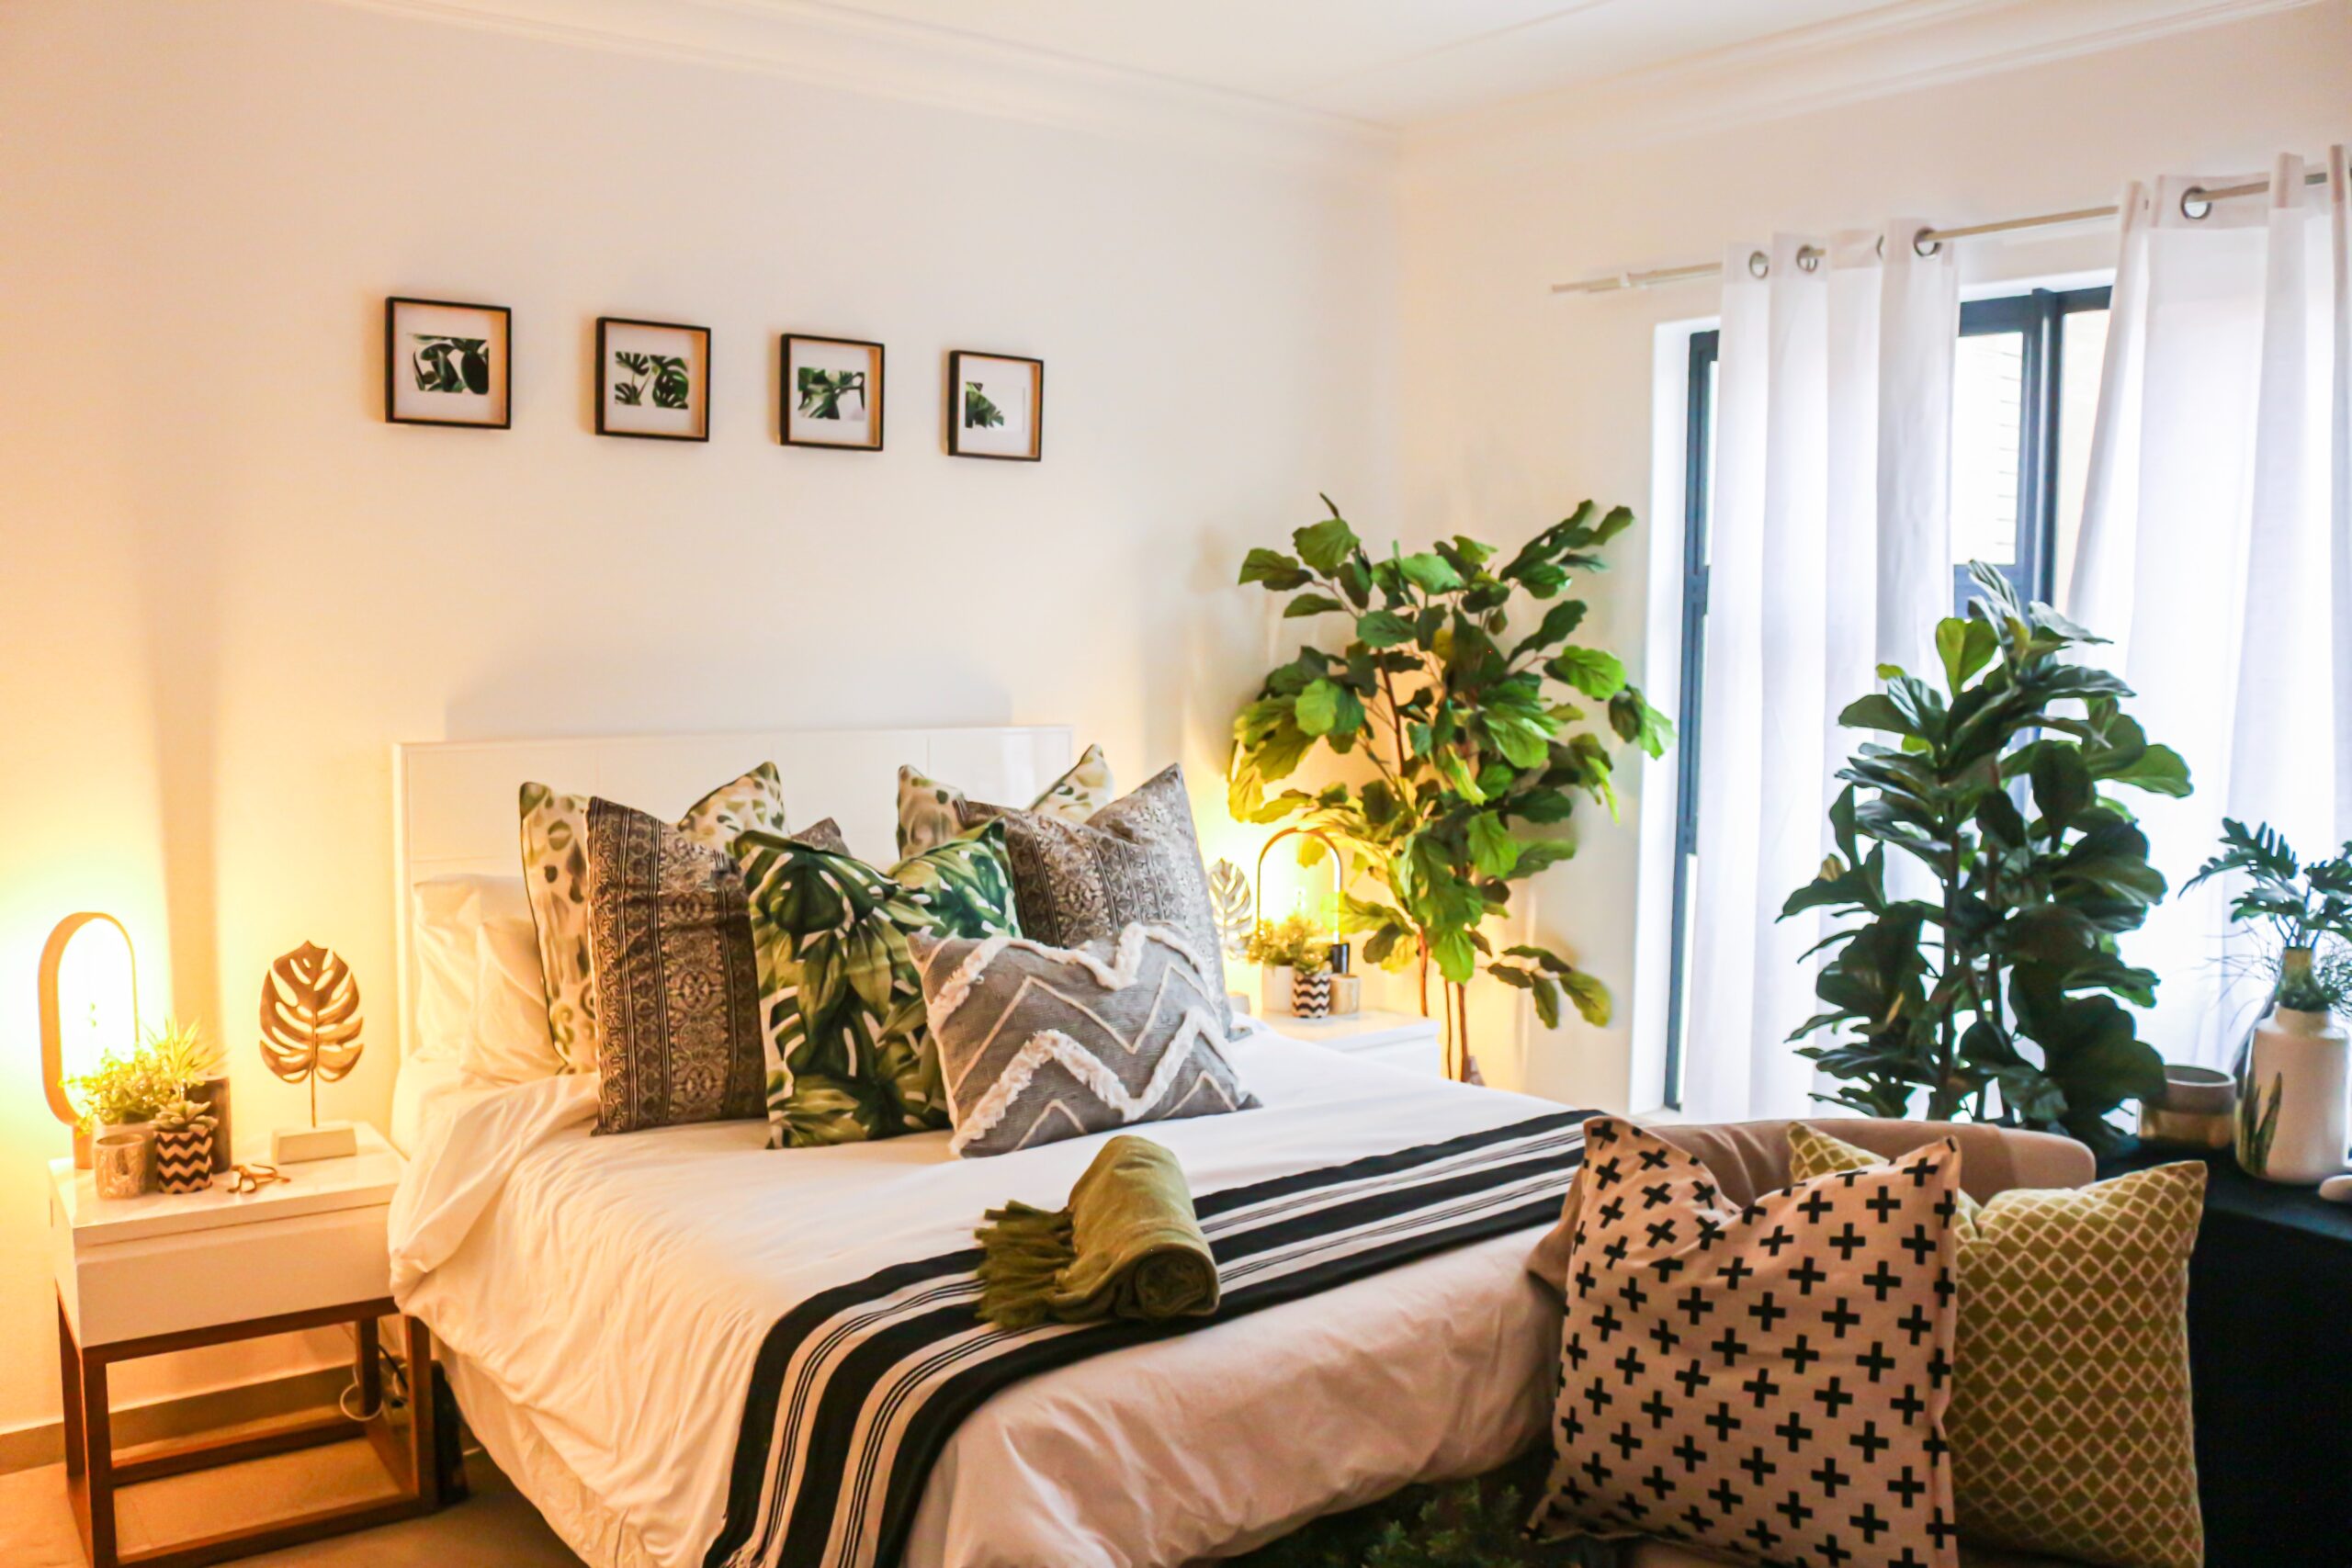 Add a bit of greenery to your boho bedroom to make the space in touch with nature. Pictured: A boho bedroom with plants.